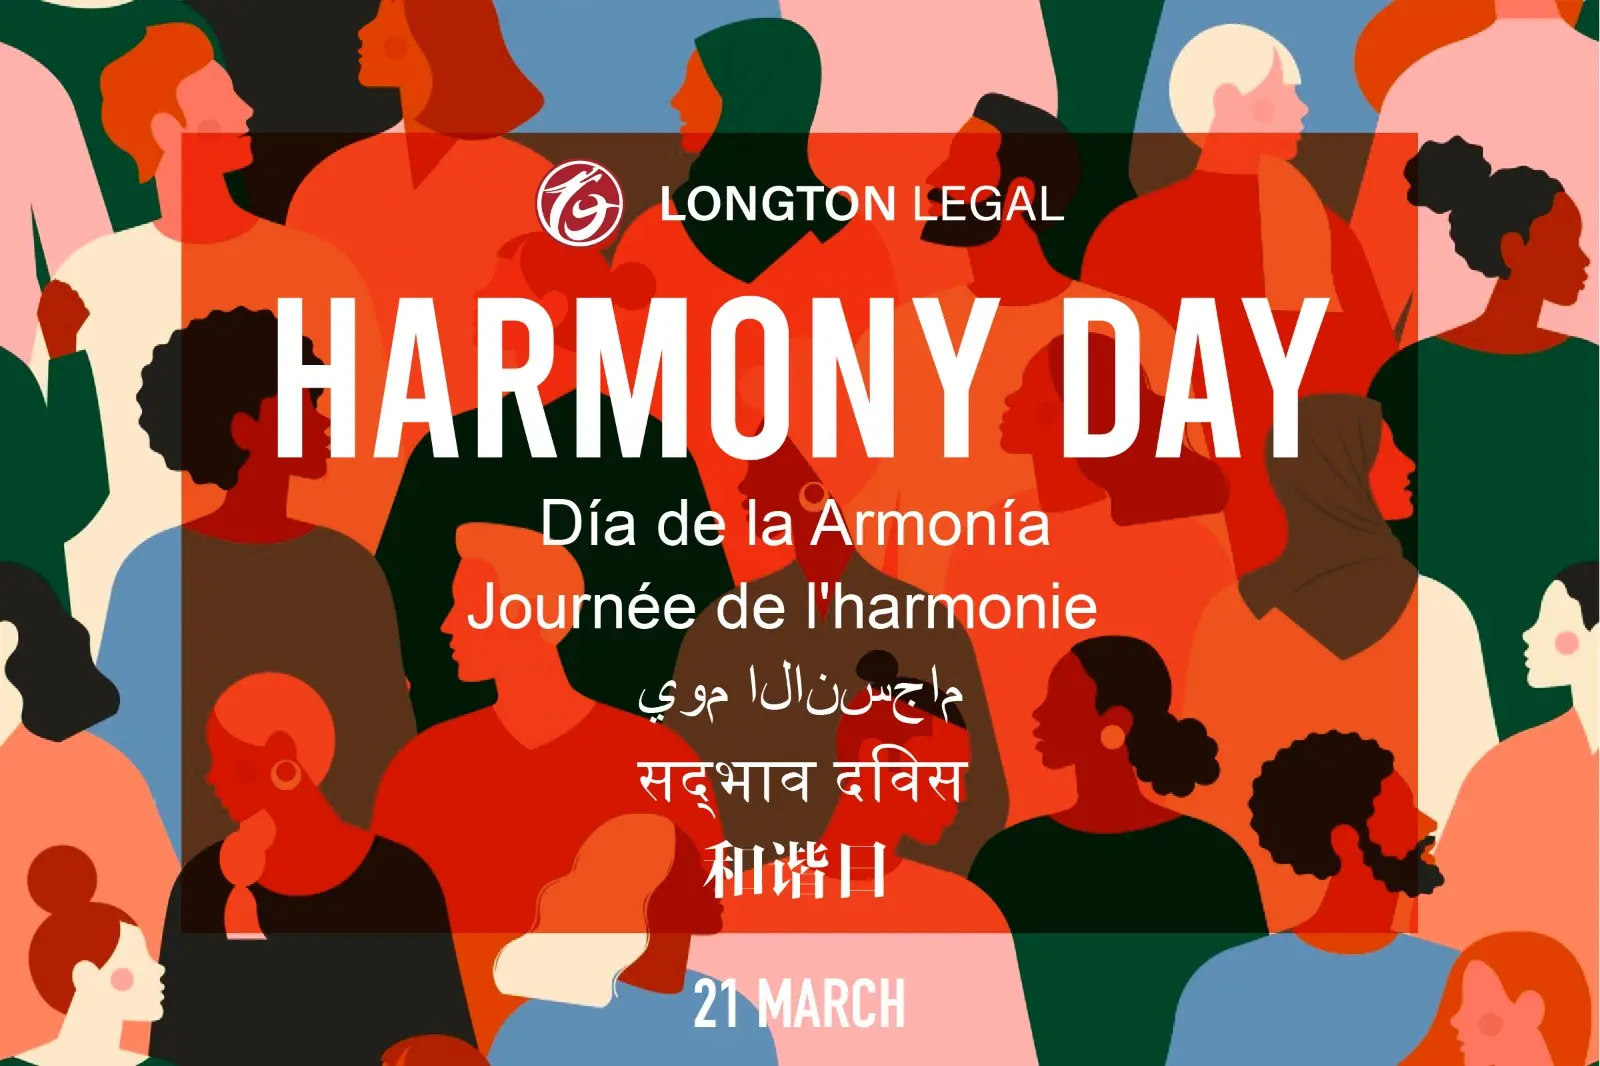 We come together to celebrate Harmony Day on 21 March